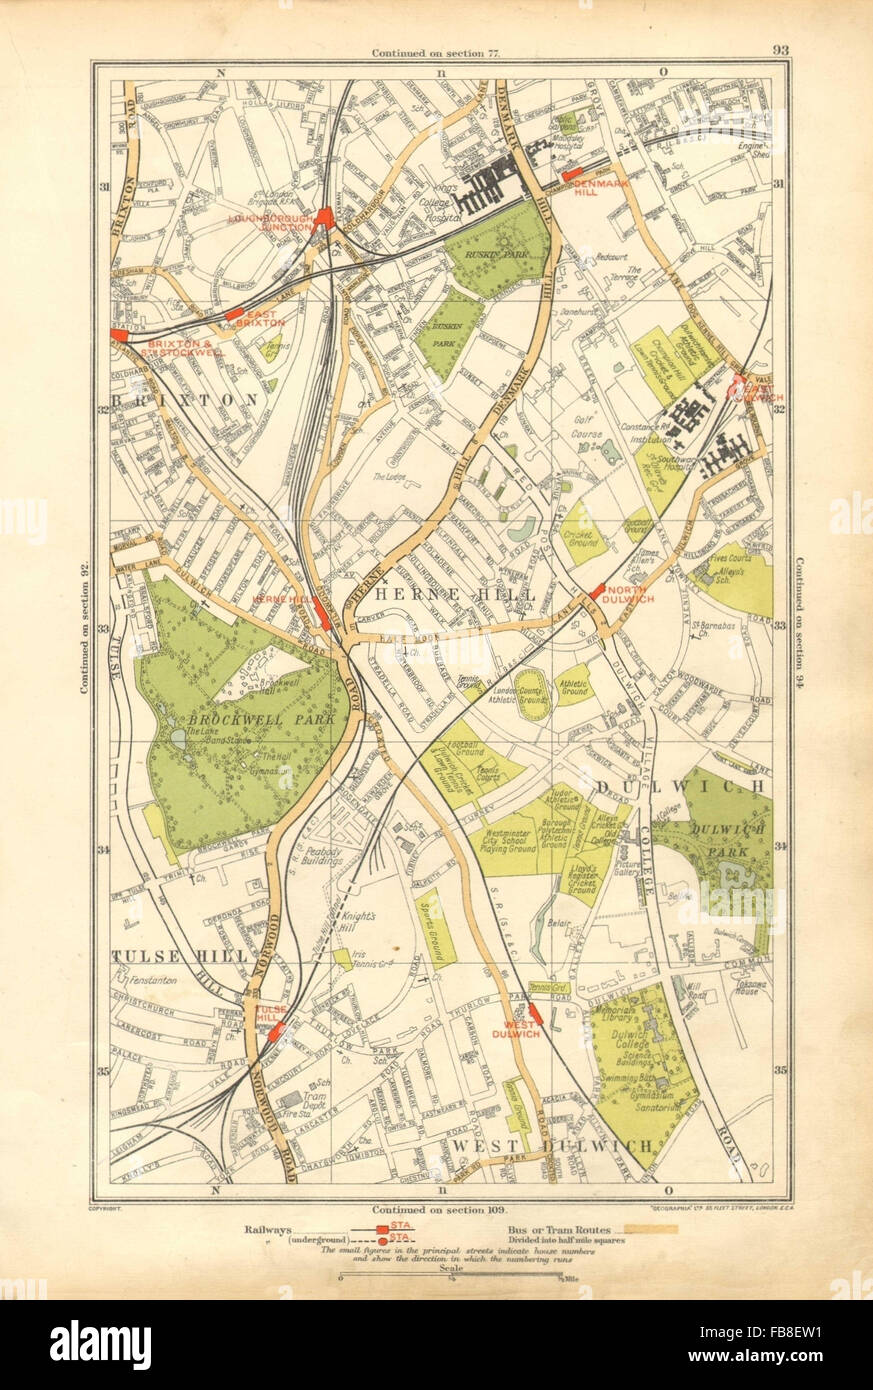 LONDON: Dulwich,Herne Hill,Tulse Hill,Brixton,Stockwell,Denmark Hill, 1928 map Stock Photo